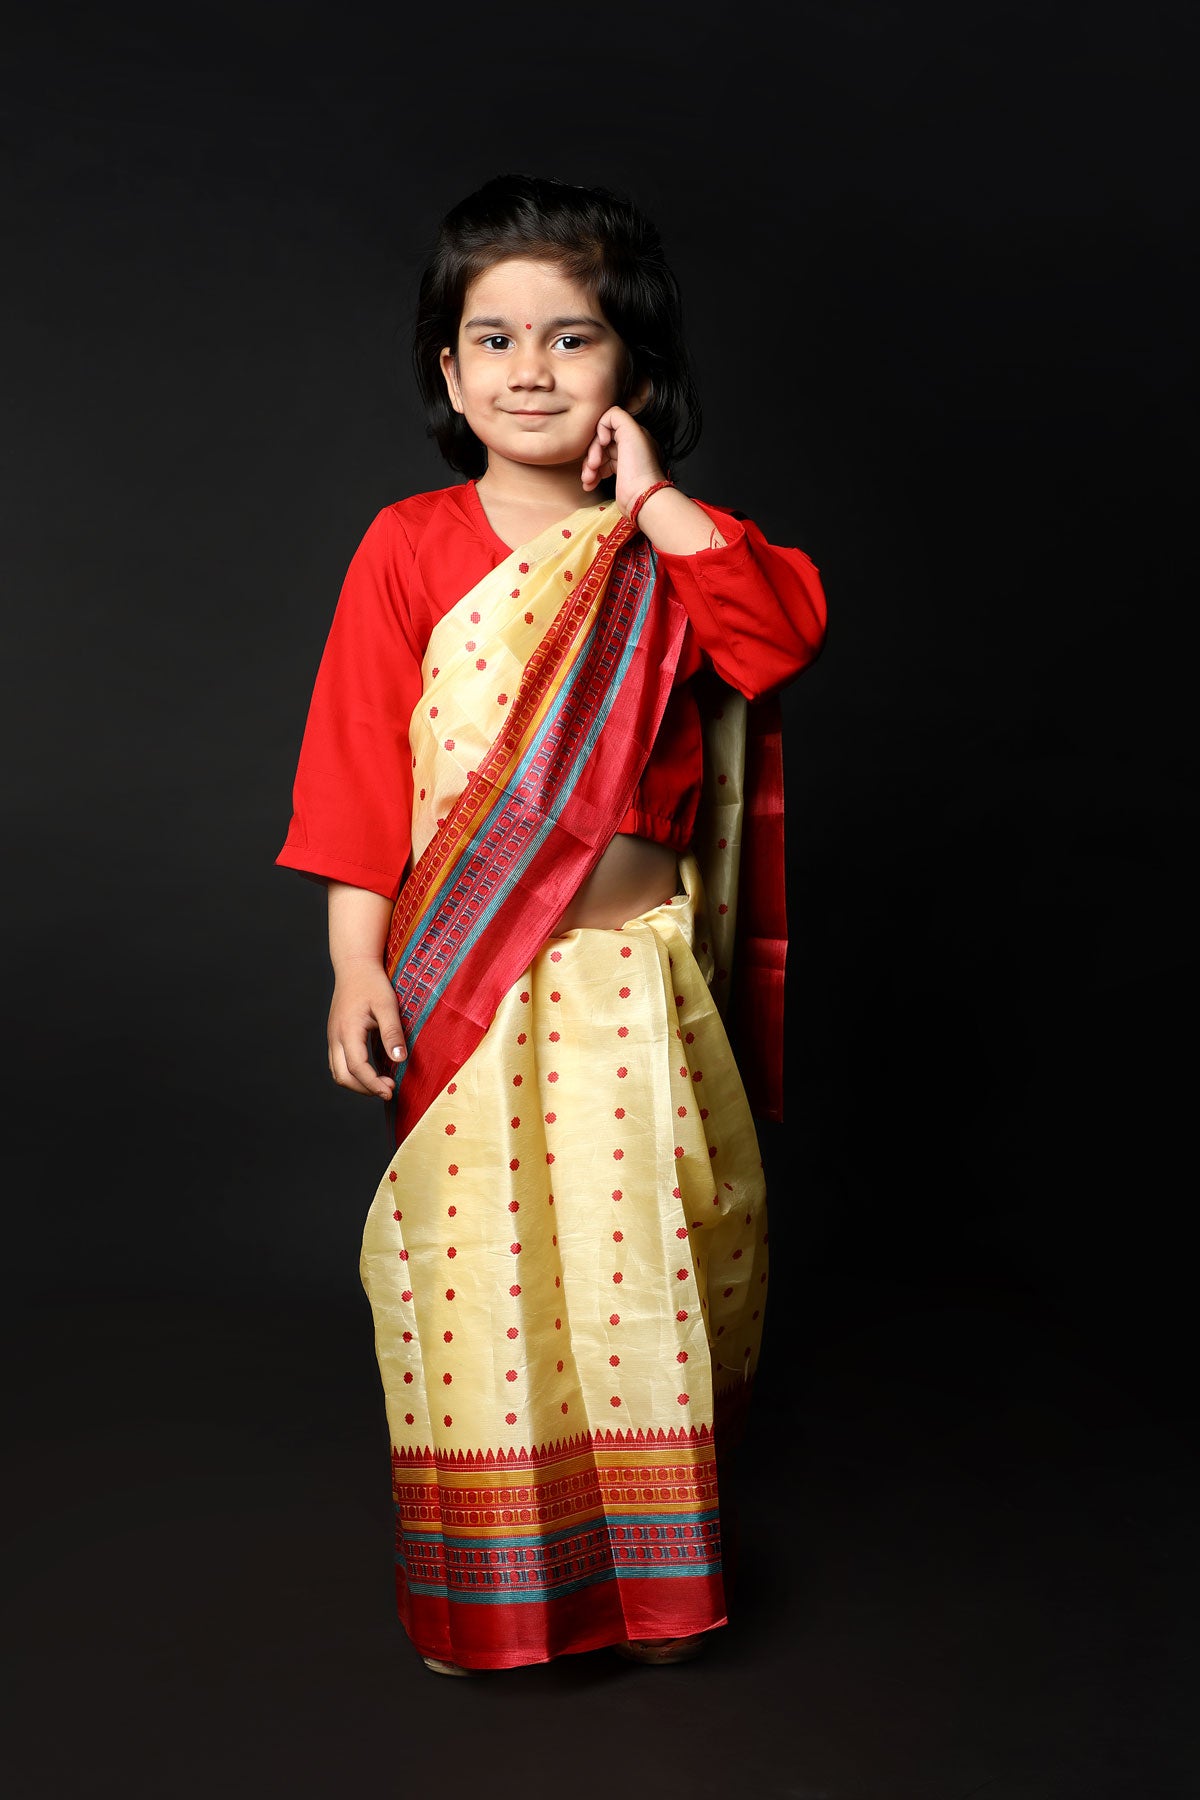 Buy ITSMYCOSTUME Marathi Girl Costume Dress Lavni Saree Folk Dance Set for  Kids Online at Low Prices in India - Amazon.in